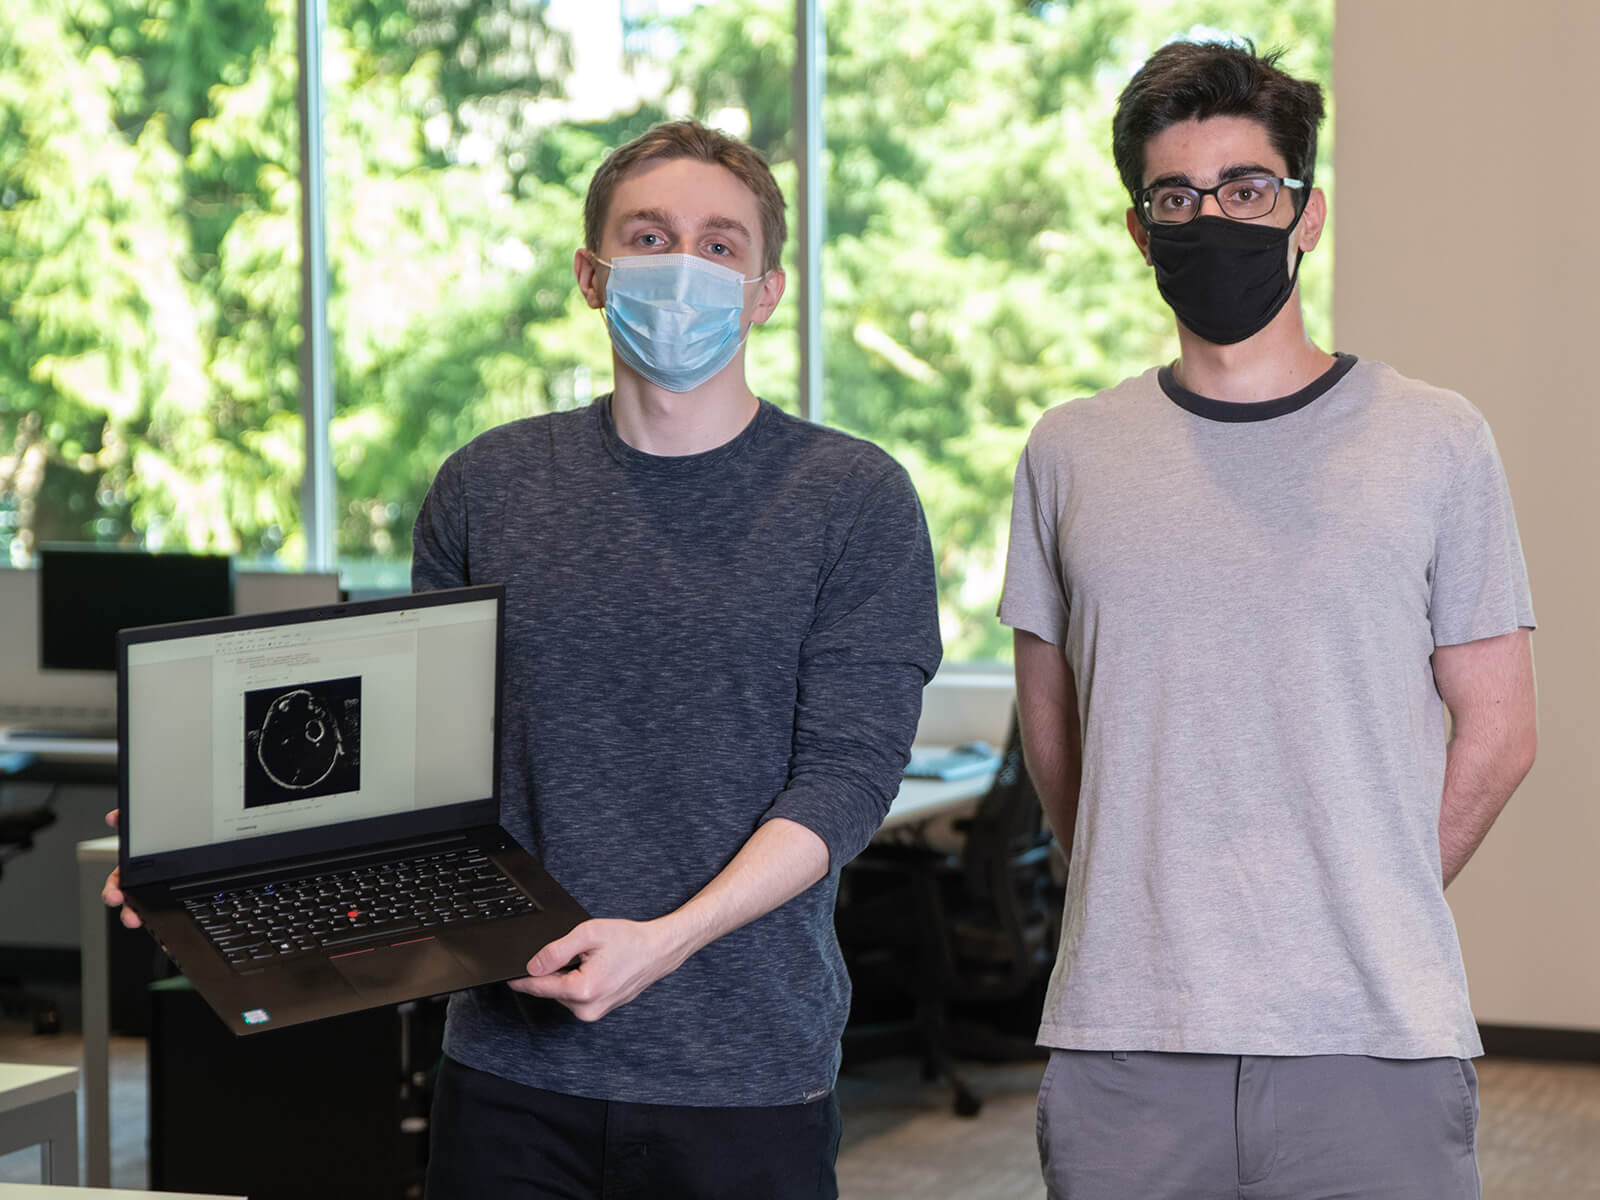 DigiPen BS in Computer Science in Machine Learning sophomores Eric Zander and Andrew Ardeleanu pose in a campus computer lab wearing face masks. 